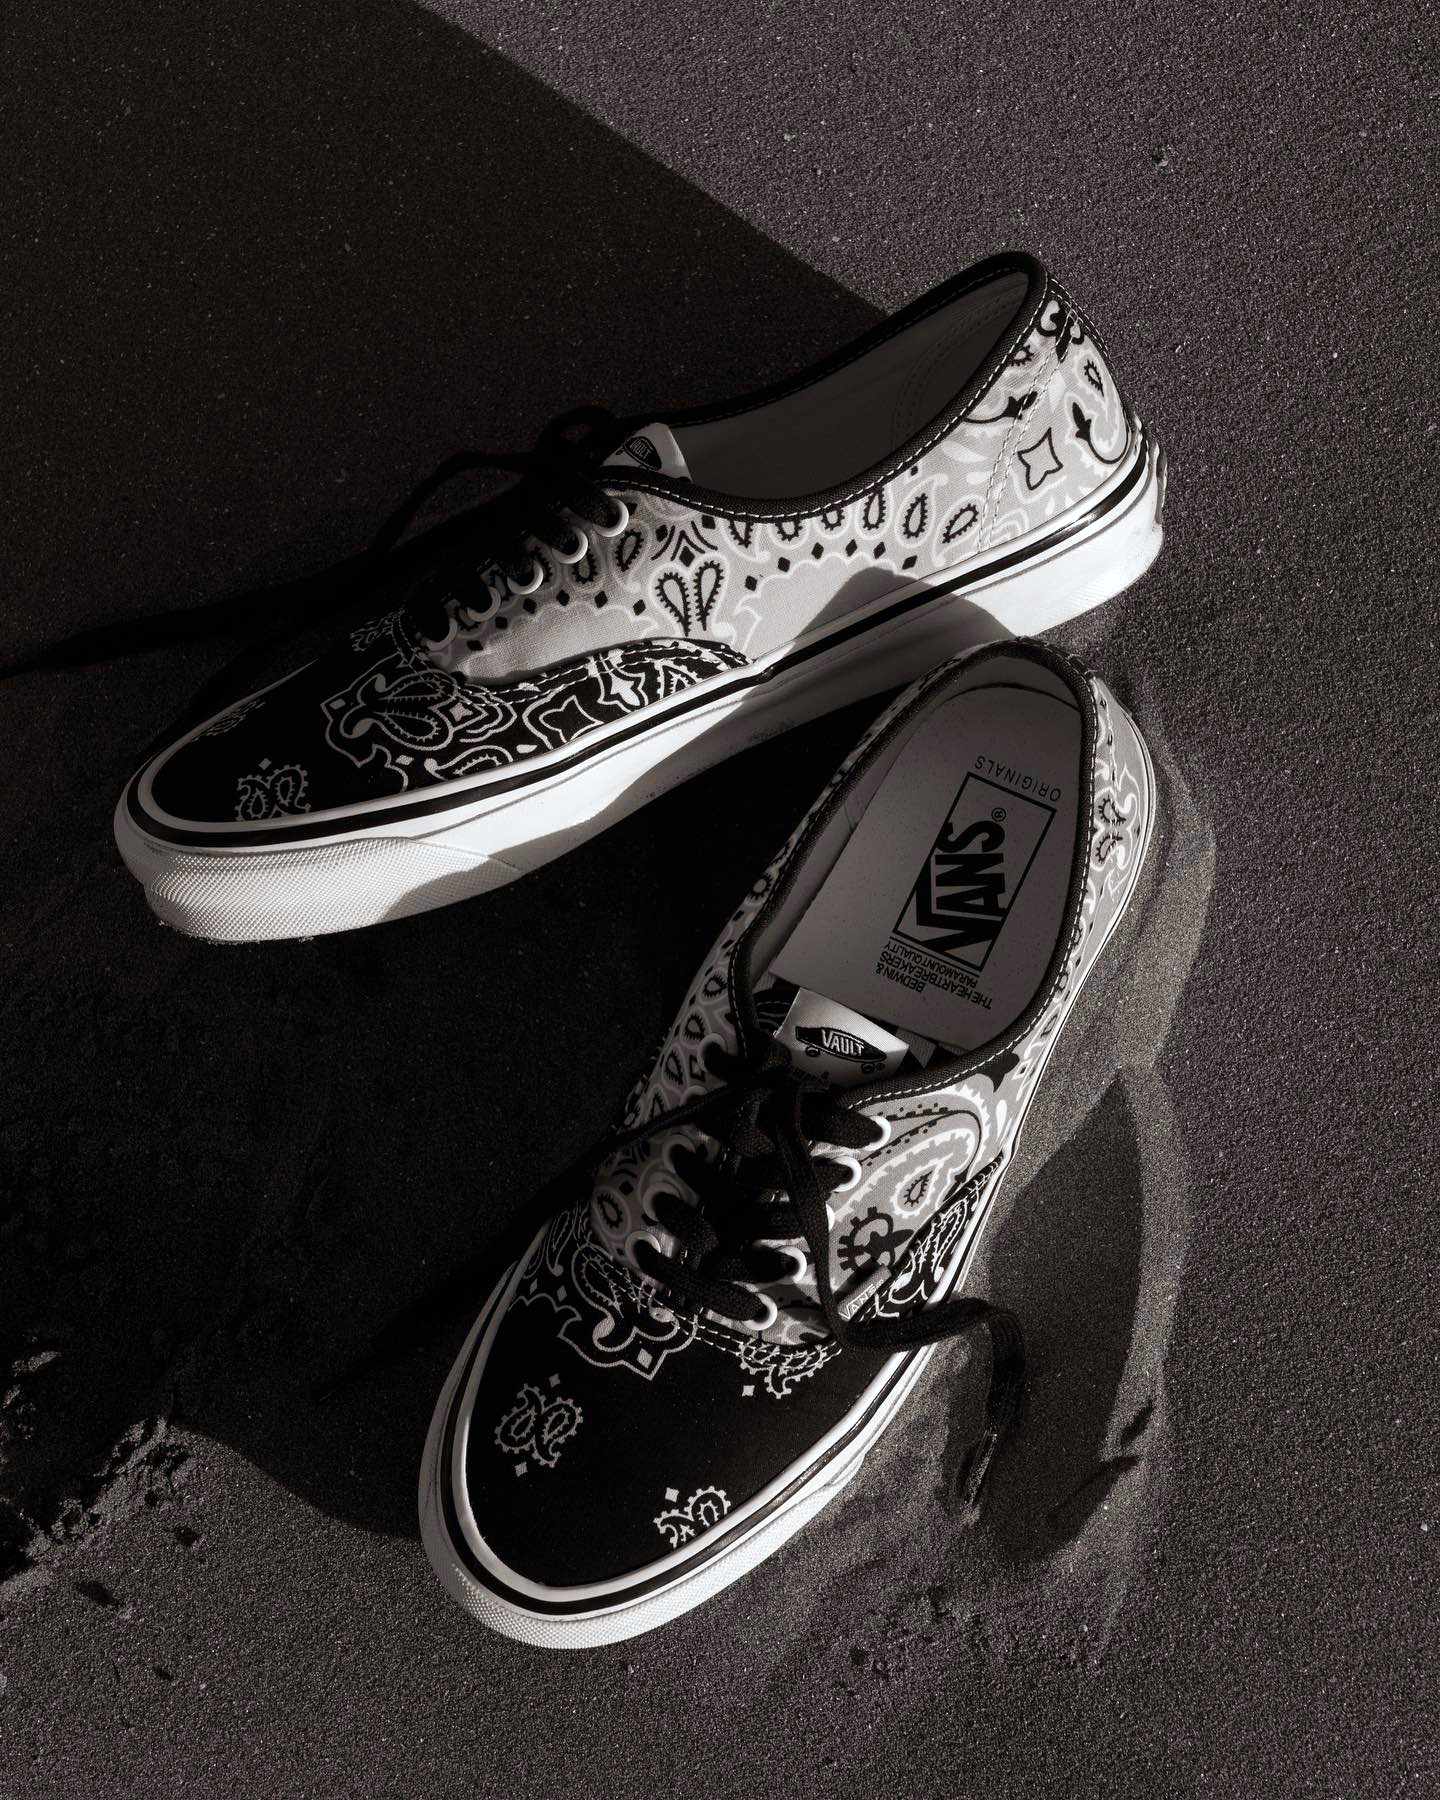 Bedwin & the Heartbreakers' collaborative Vans Authentic sneakers in a black and grey paisley pattern